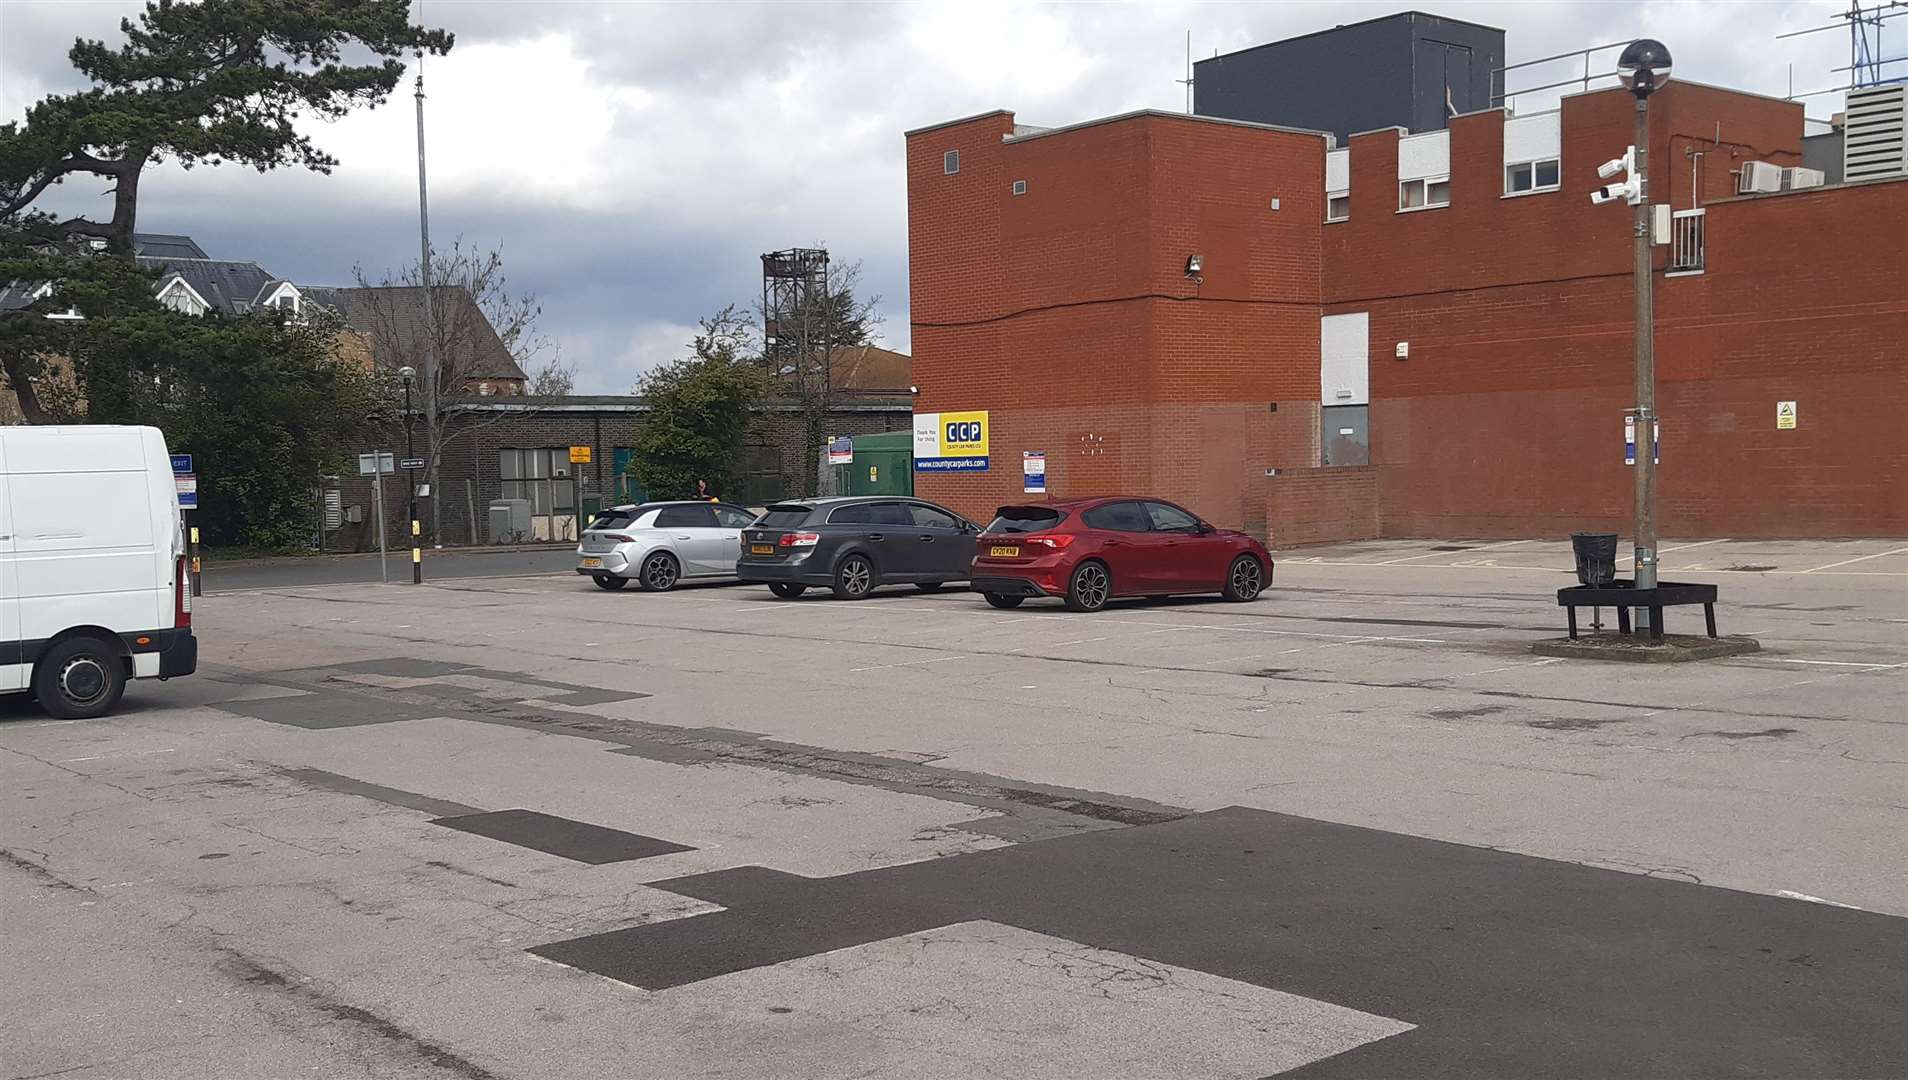 Parking spaces at Nightingale Way would be reconfigured as part of McDonald's development bid